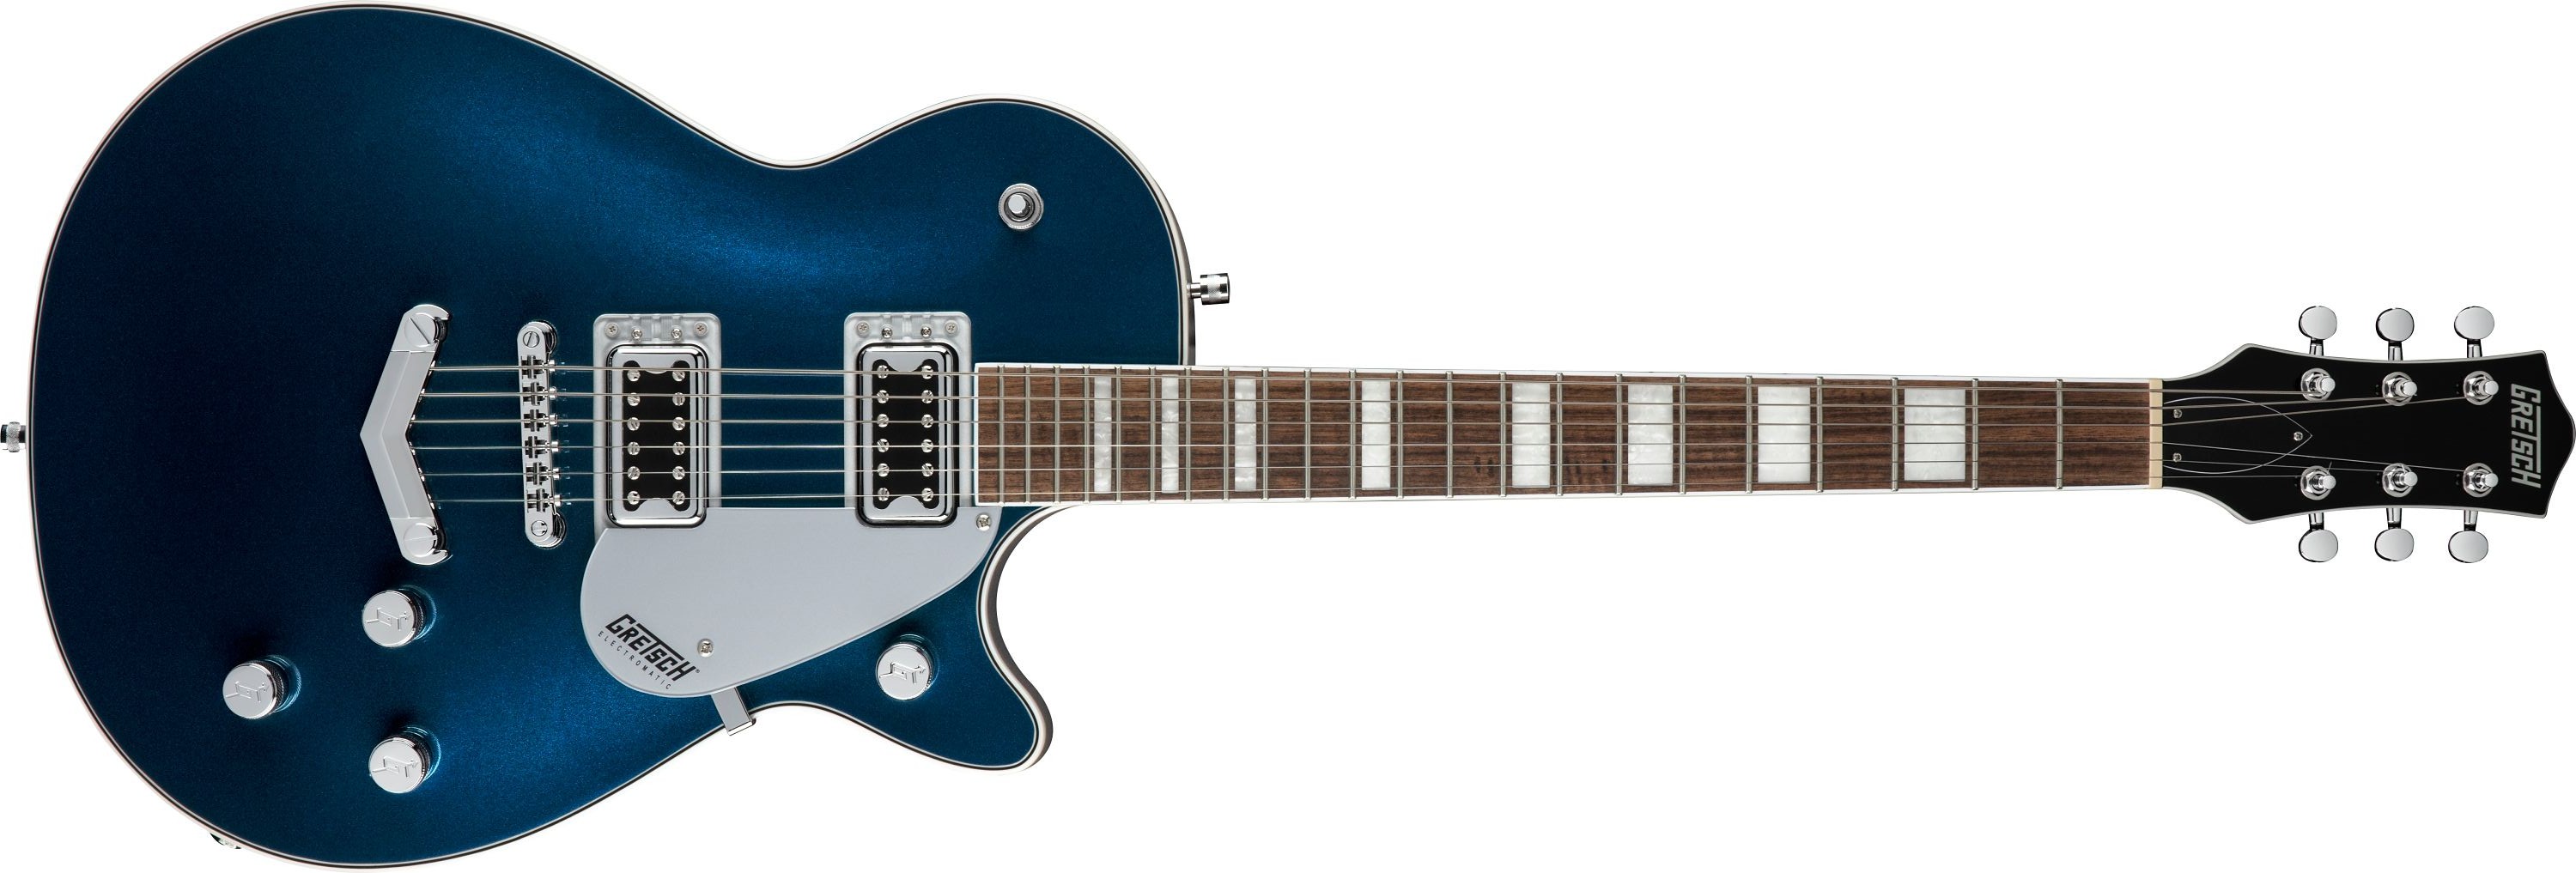 GRETSCH® LAUNCHES REFRESHED ELECTROMATIC® COLLECTION 